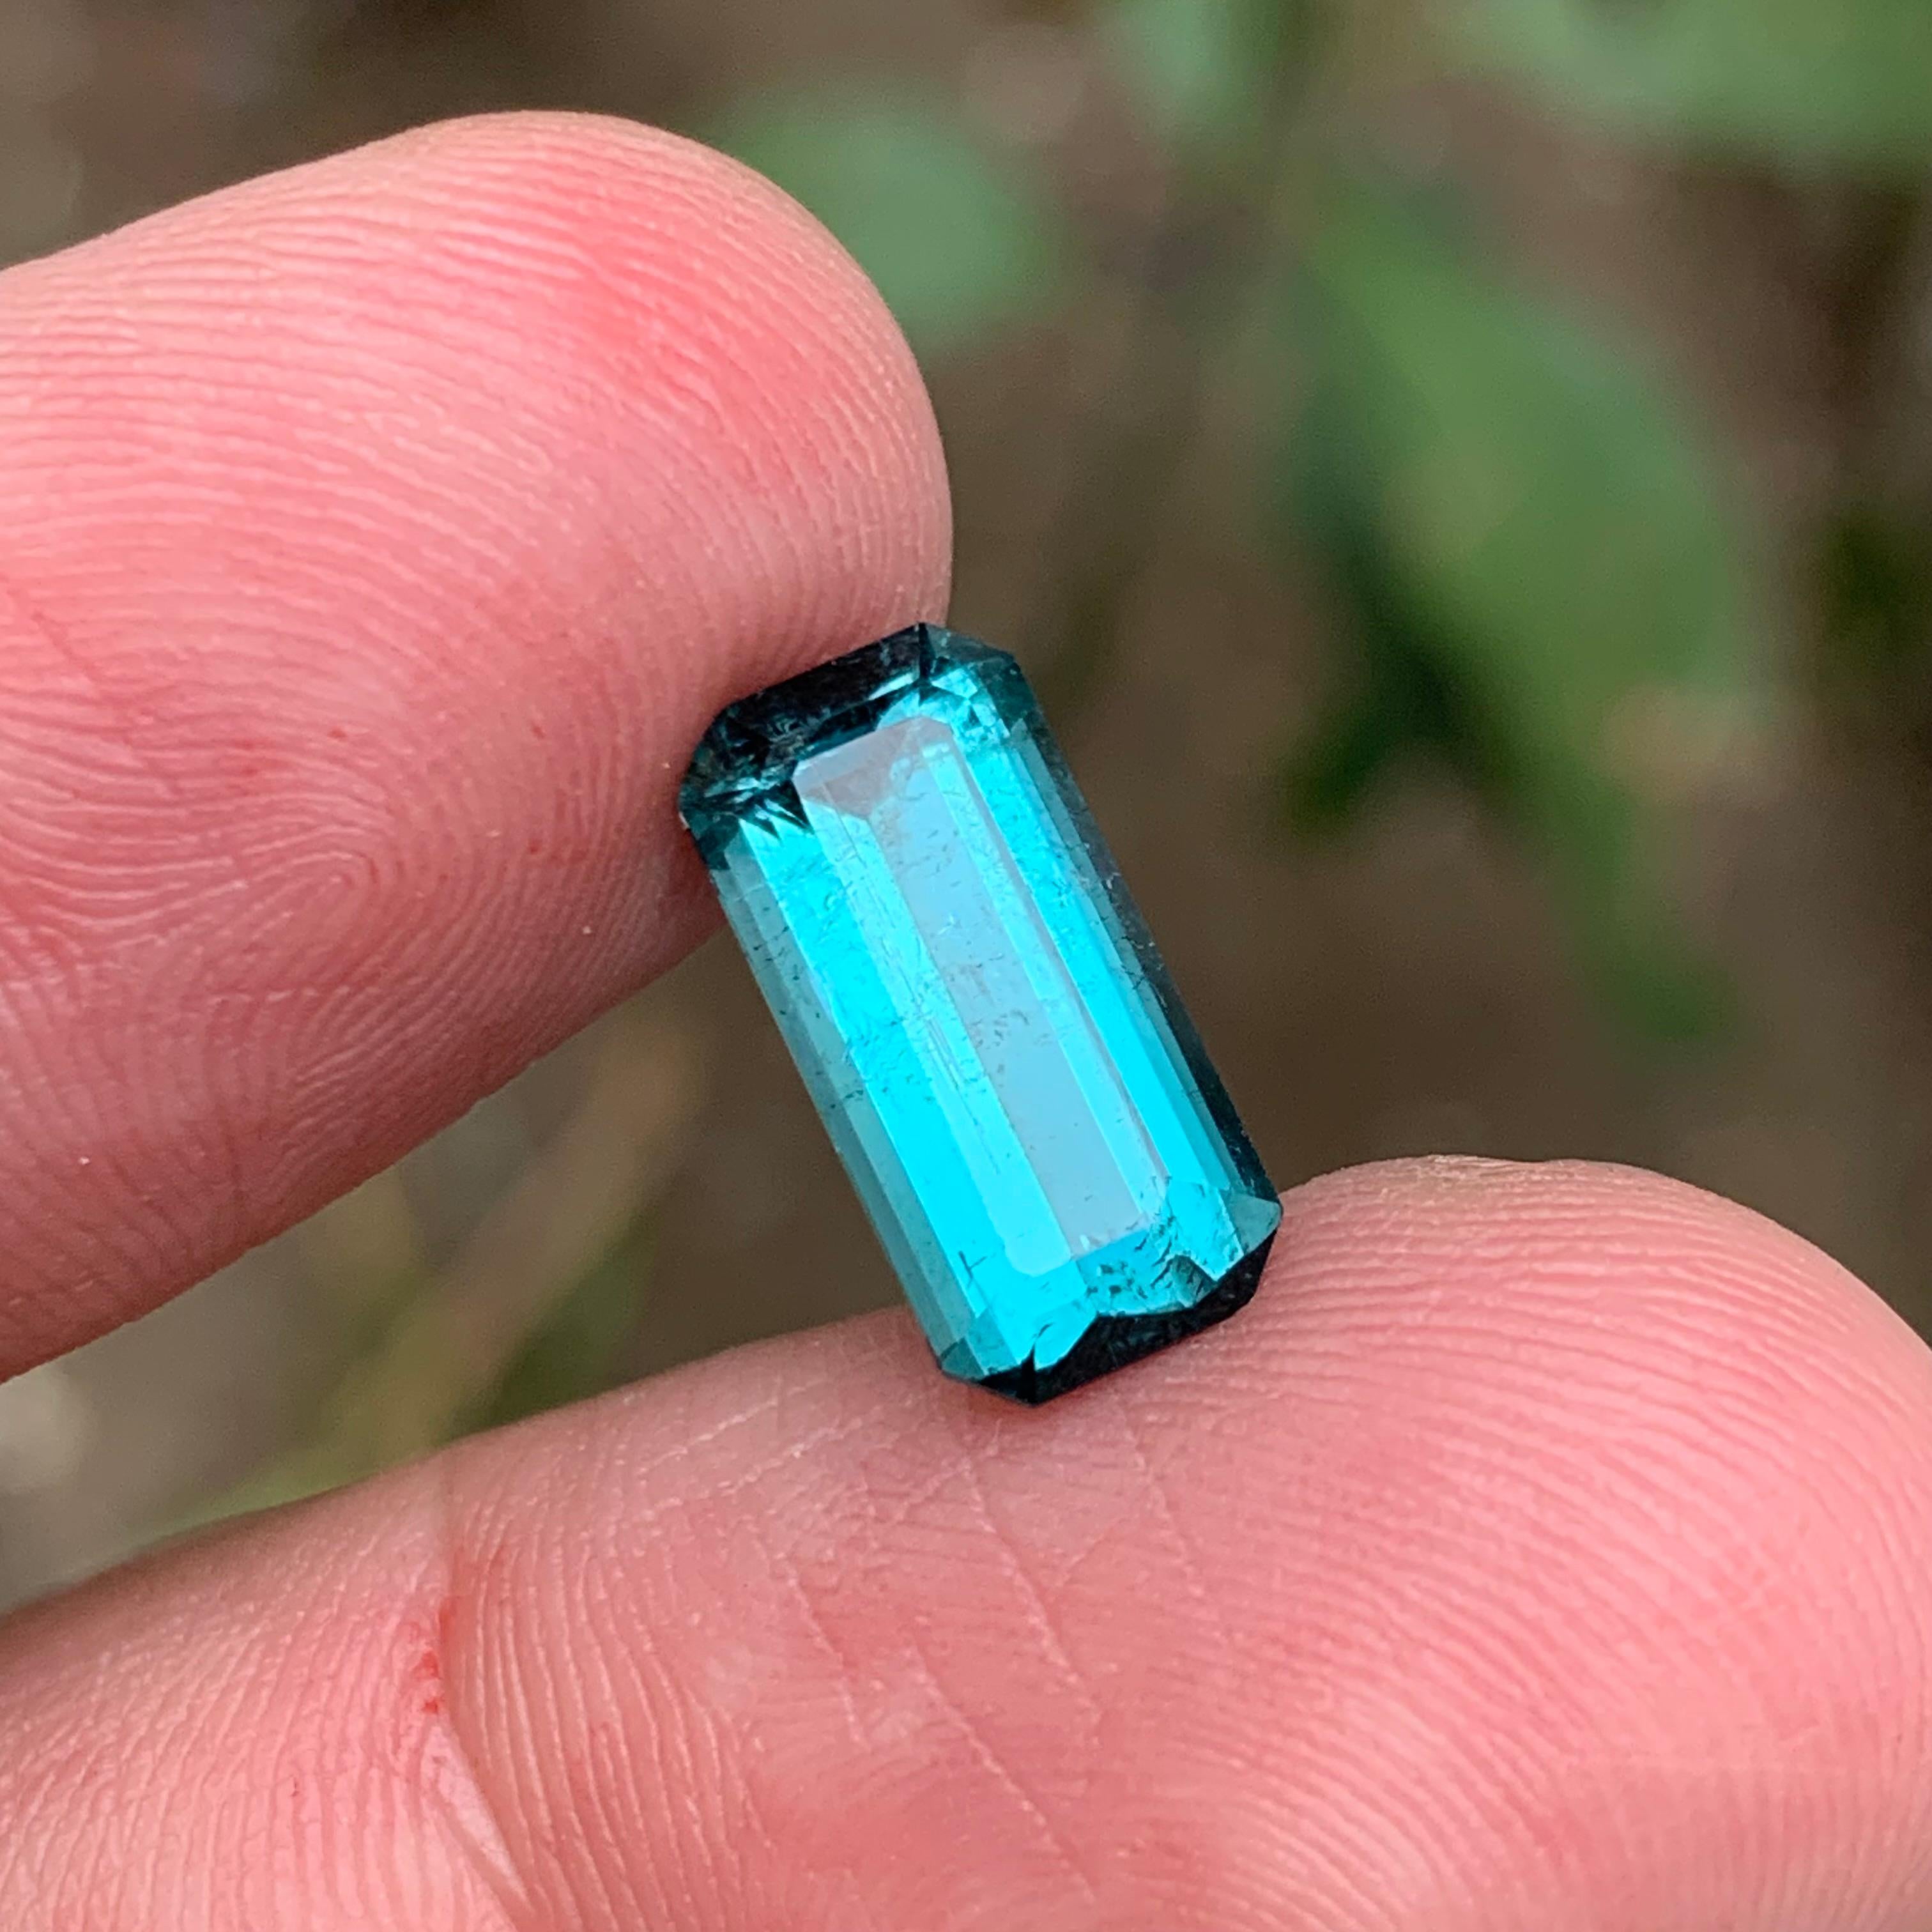 Rare Neon Blue Natural Tourmaline Gemstone, 4 Ct Emerald Cut for Ring/Jewelry AF For Sale 4